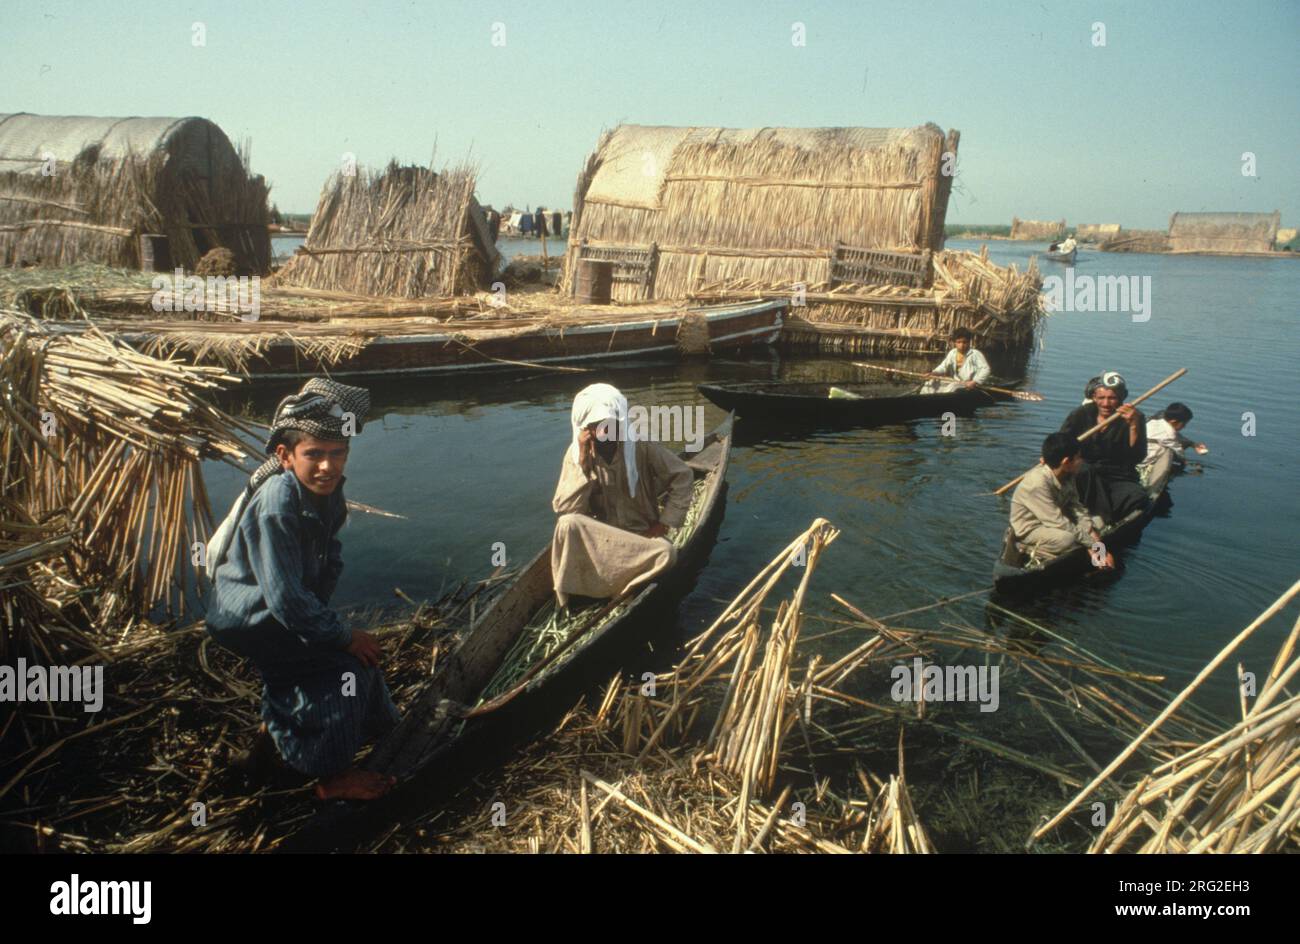 Marsh Arabs Iraq. Marsh Arab man and woman in boats with children.Transport between islands known as dibin. Reed island houses. Rivers Tigris and Euphrates wetlands, Hammar marshes. Southern Iraq 1984  1980s HOMER SYKES Stock Photo